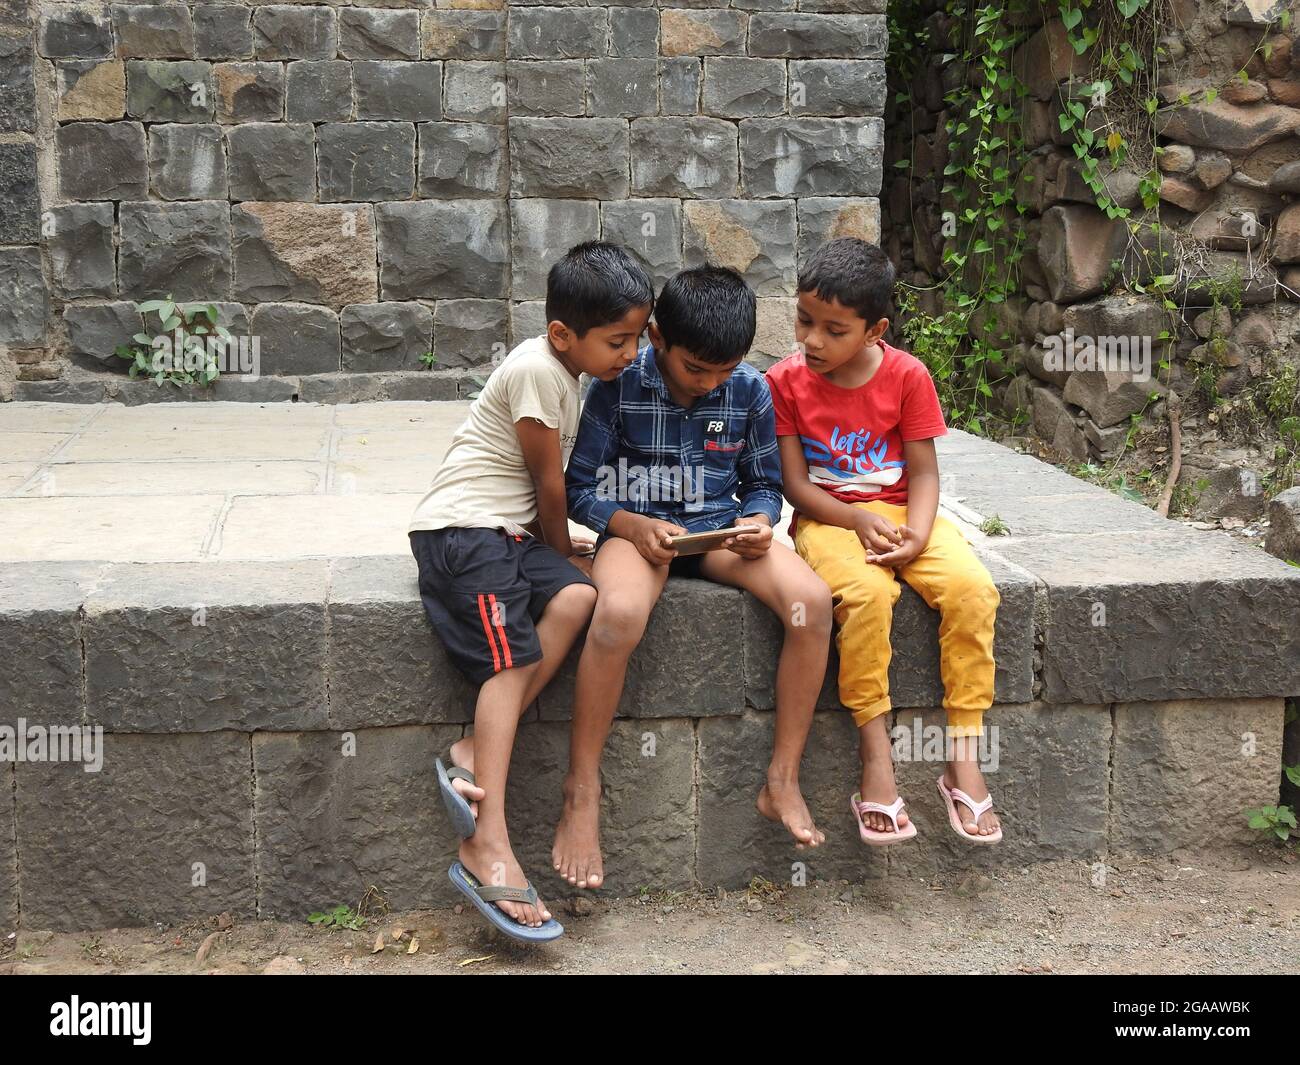 17 July 2021, Maharashtra, India, Little Indian kids playing with cellphone. Stock Photo